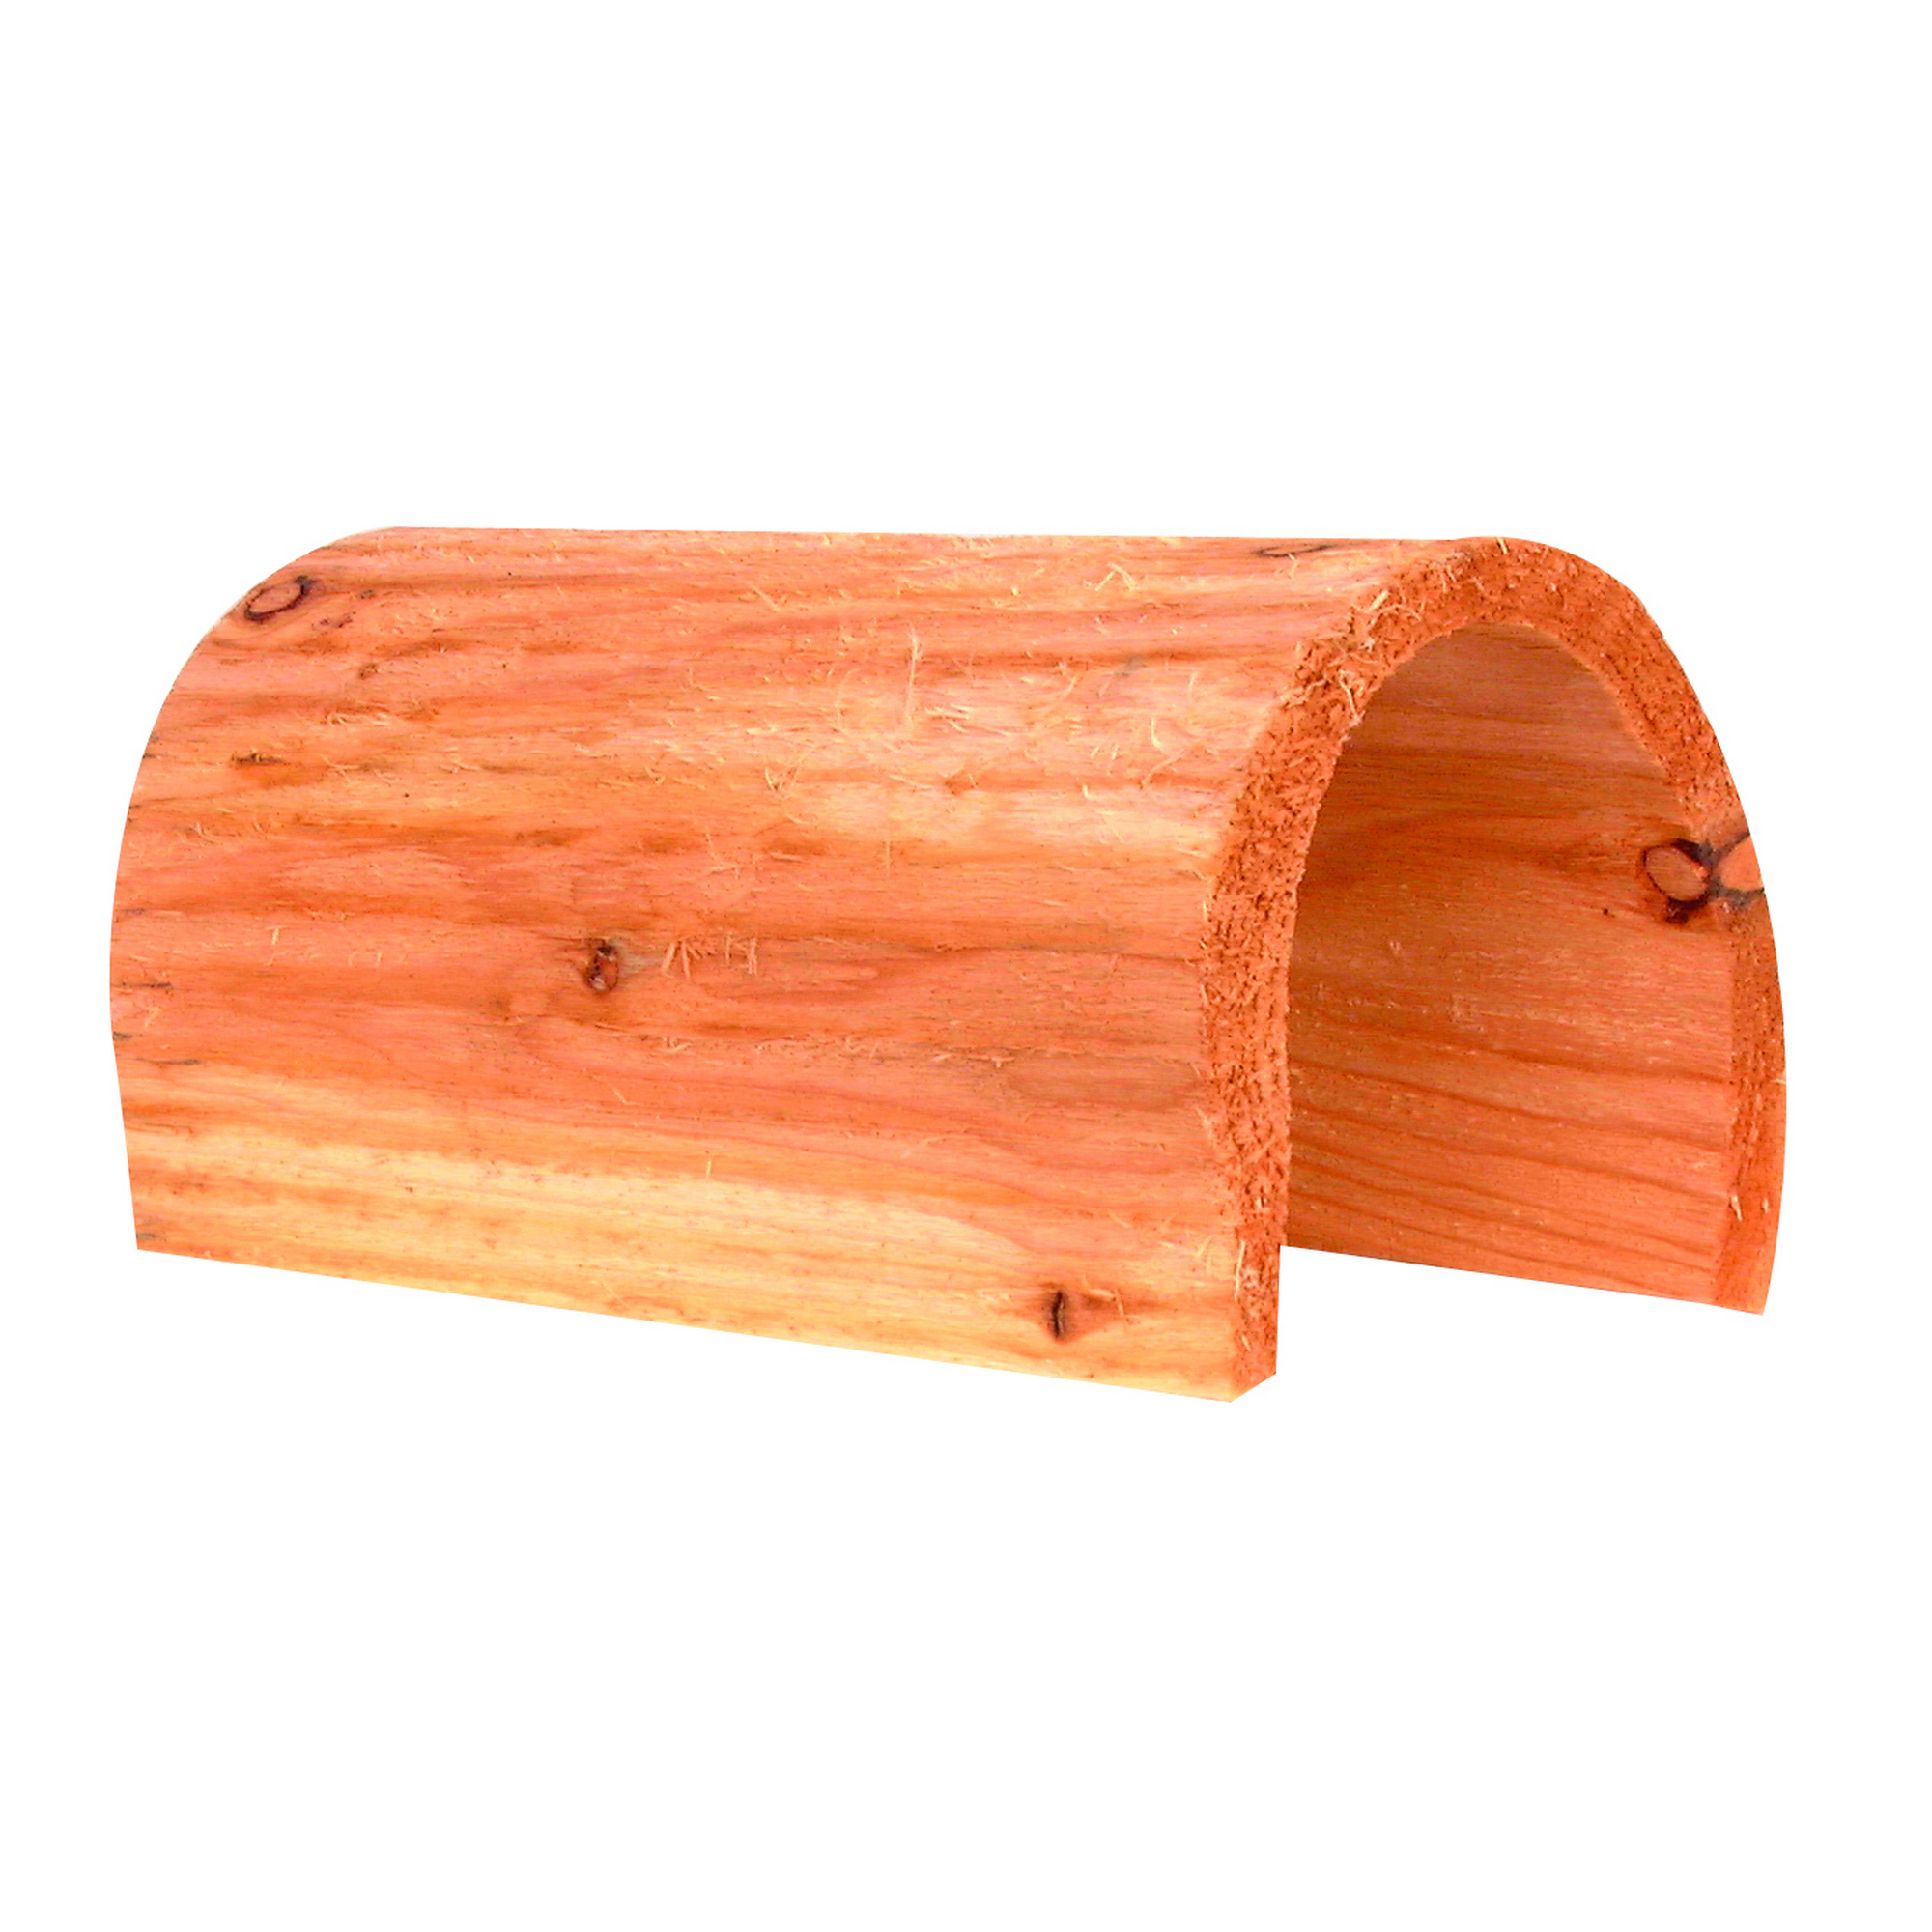 Nagertunnel Holz 20 cm + product picture